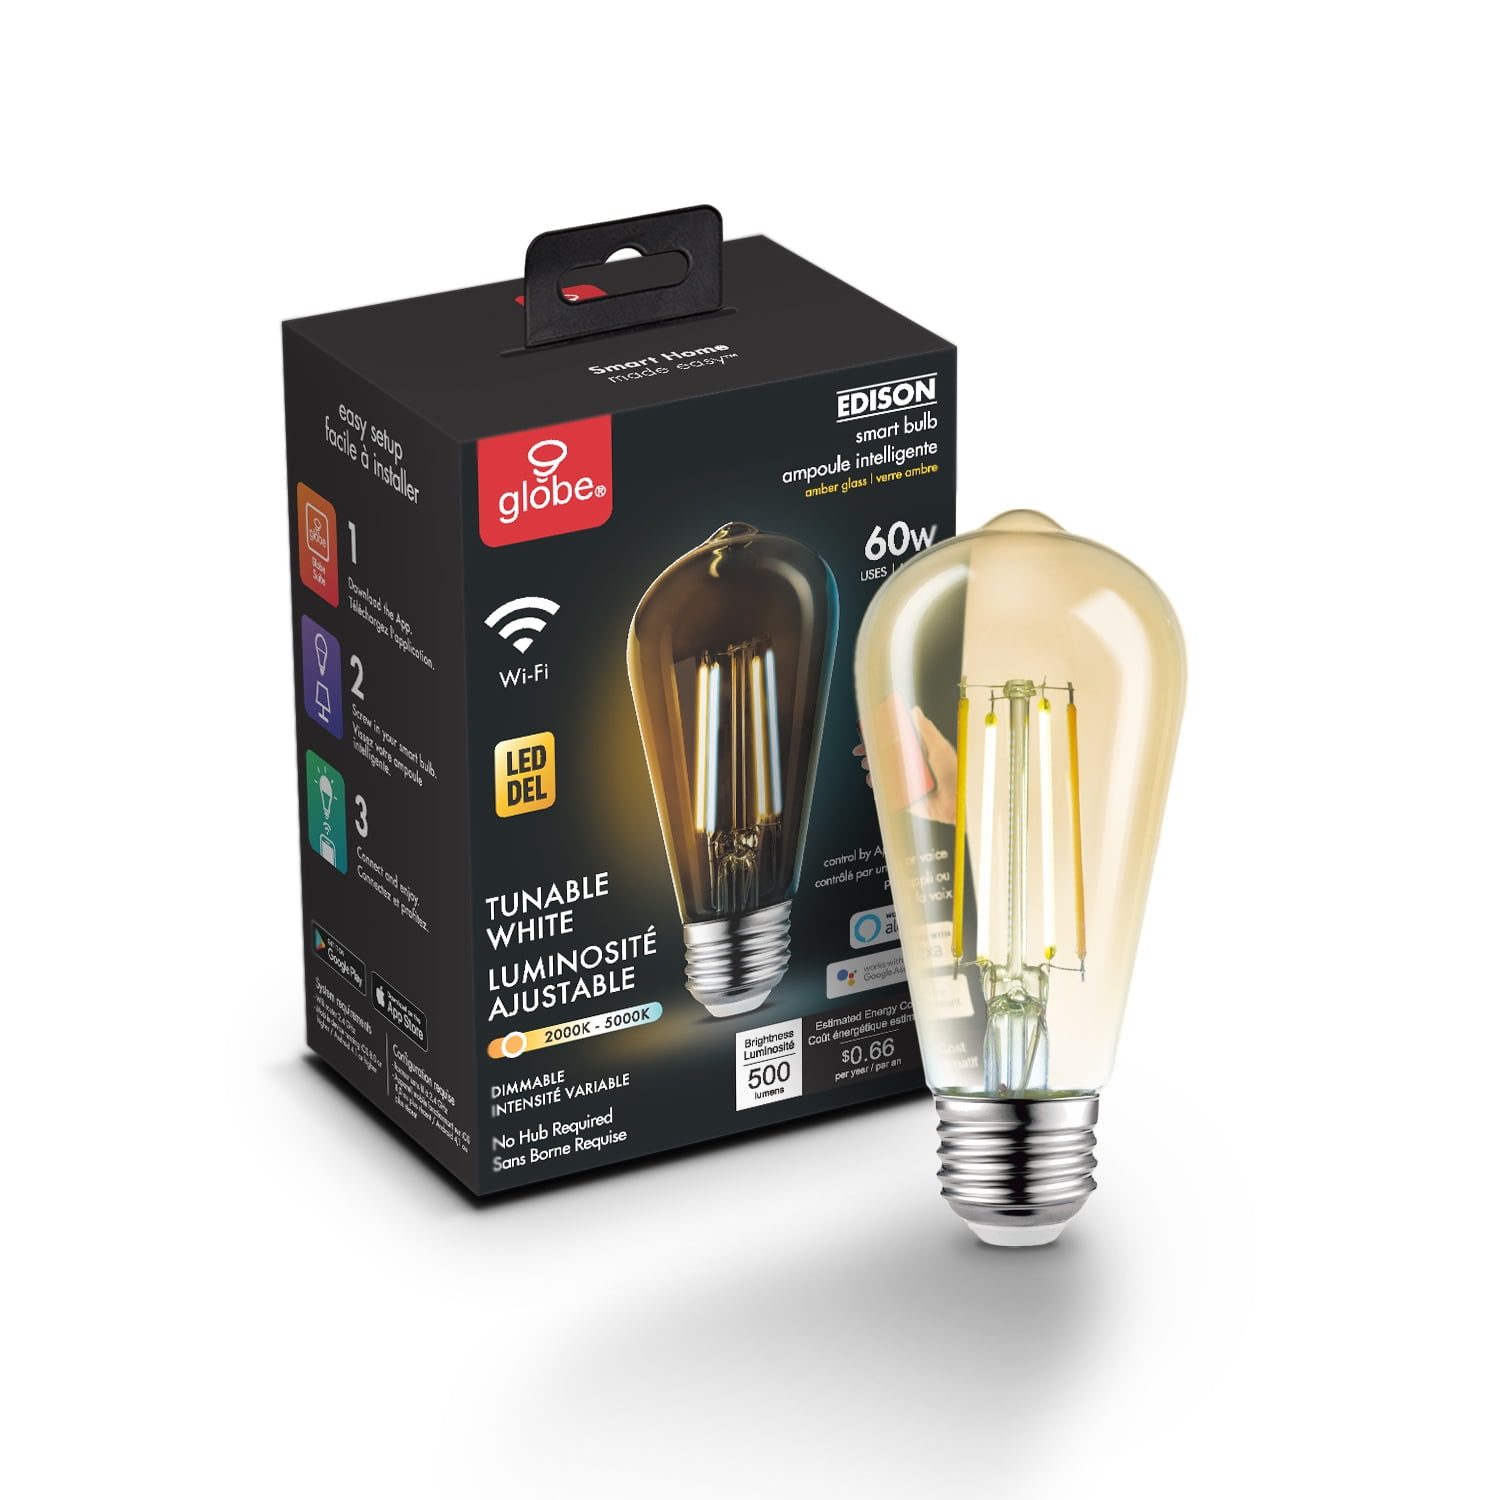 valgfri Faktura Margaret Mitchell Globe Electric Wi-Fi Smart 60W Equivalent Vintage Filament Tunable White  Amber Glass LED Light Bulb, No Hub Required, Voice Activated, ST19 Shape,  E26 Base, 34919 - Walmart.com